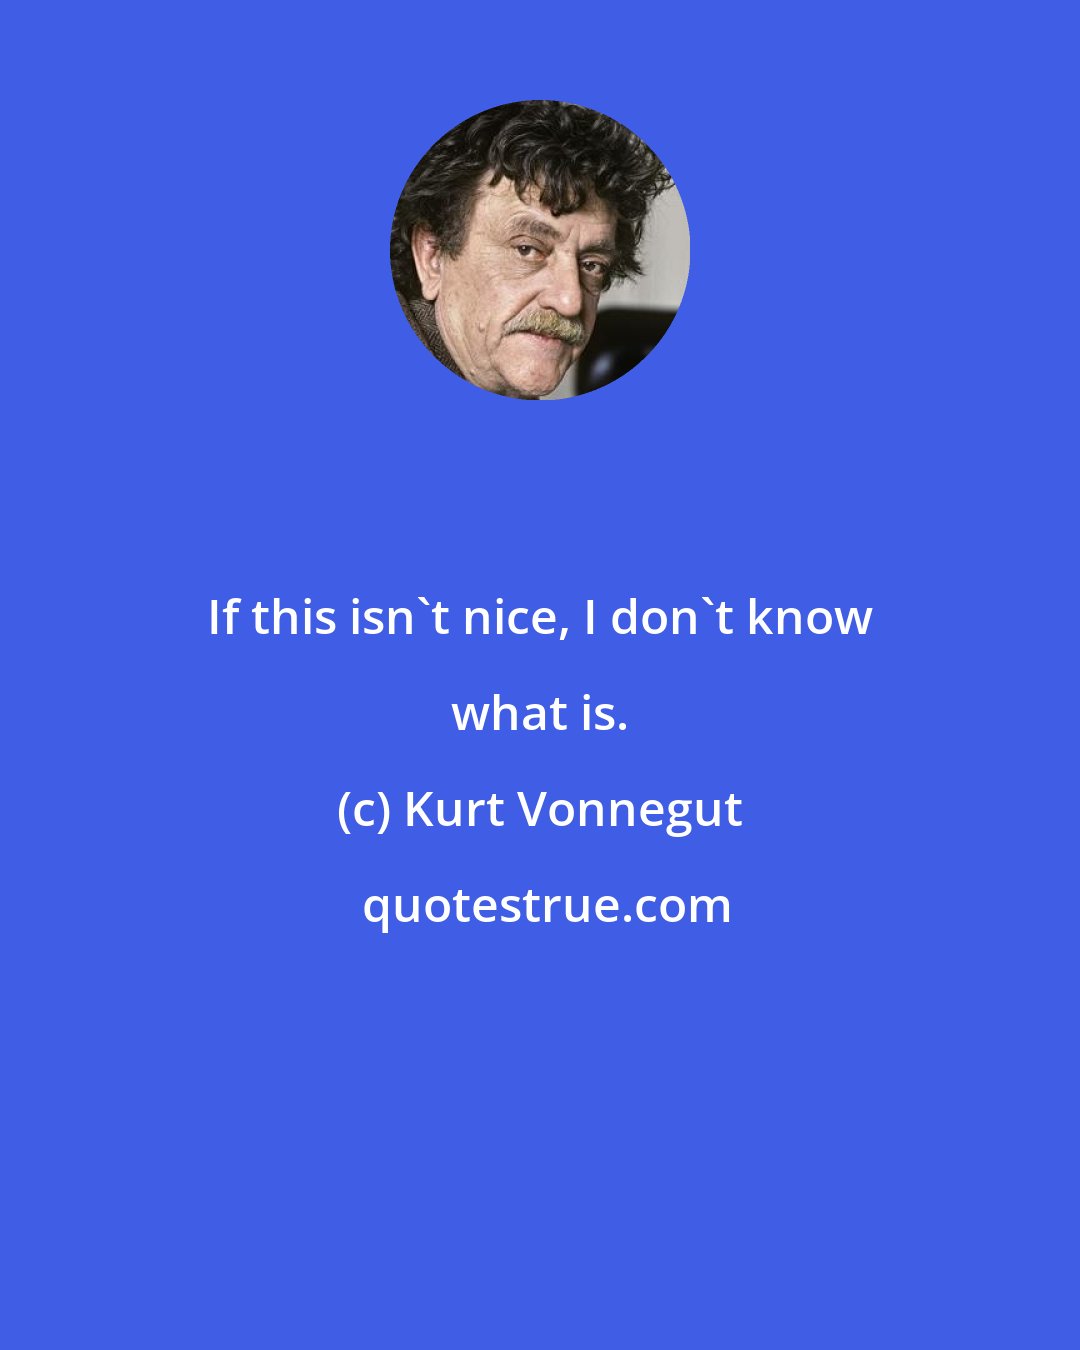 Kurt Vonnegut: If this isn't nice, I don't know what is.